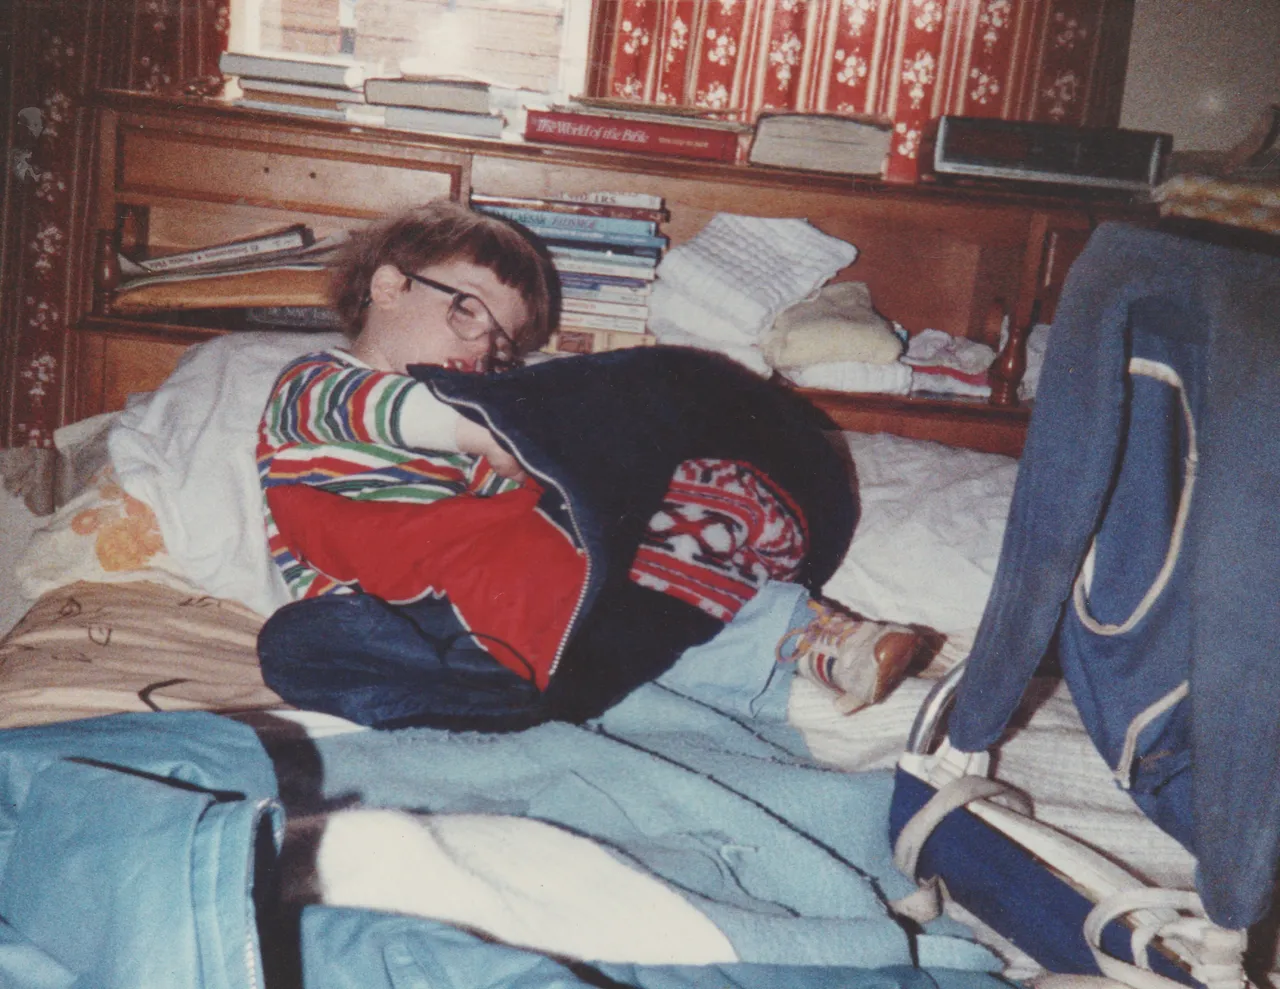 1990 maybe - Joey in parent's bed.jpg